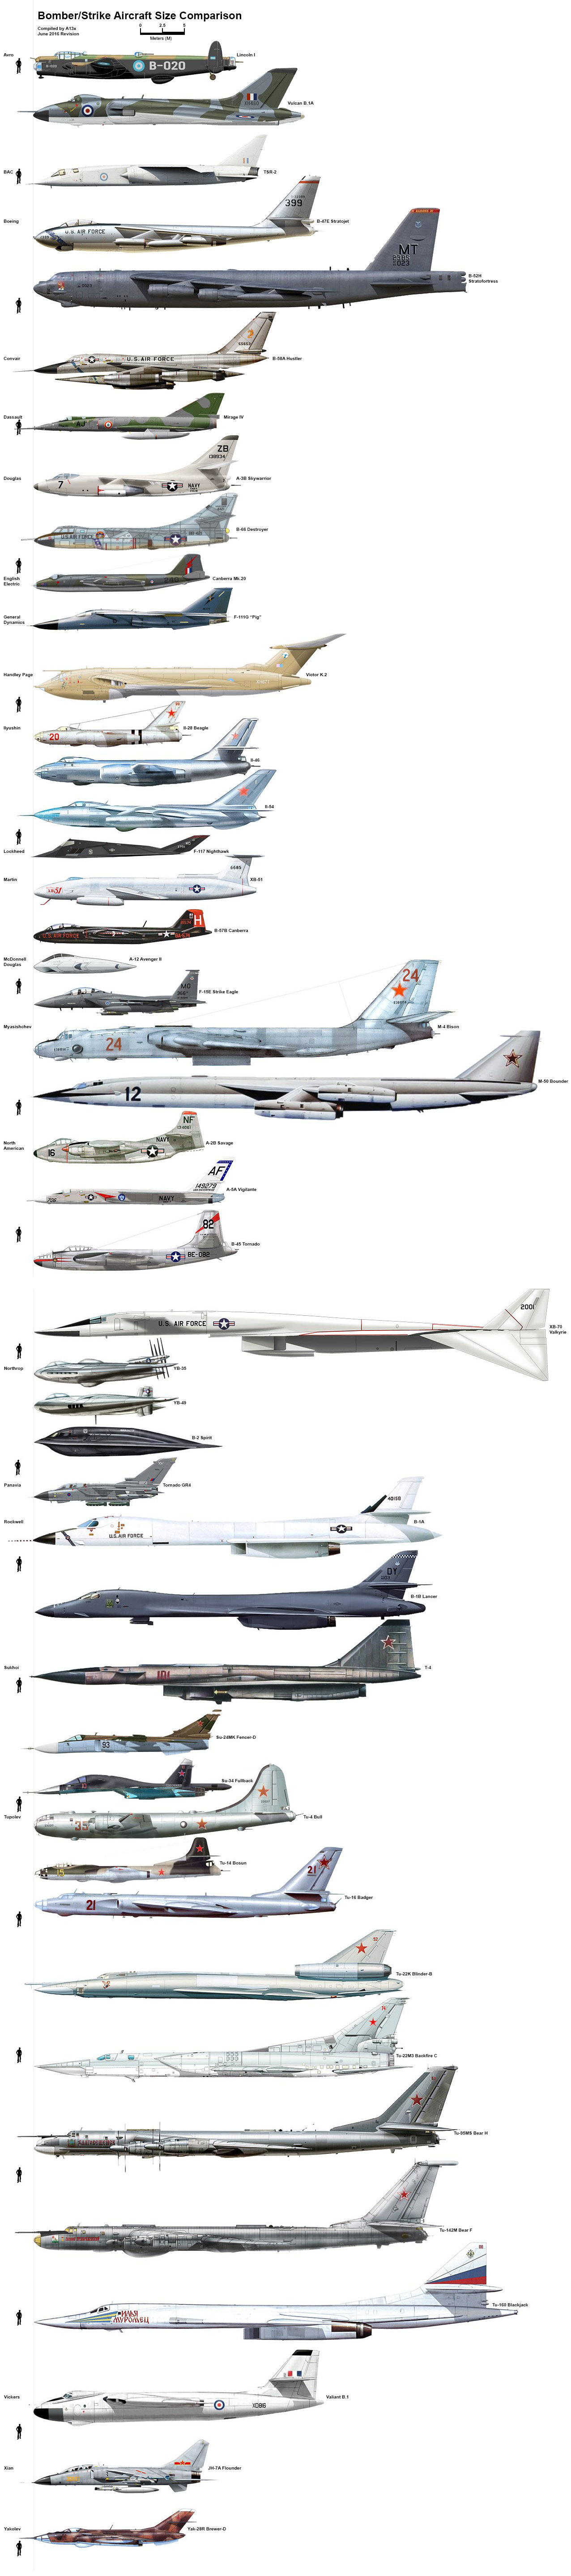 Aircraft Size Comparison Charts Compiled By A13x | tyello.com